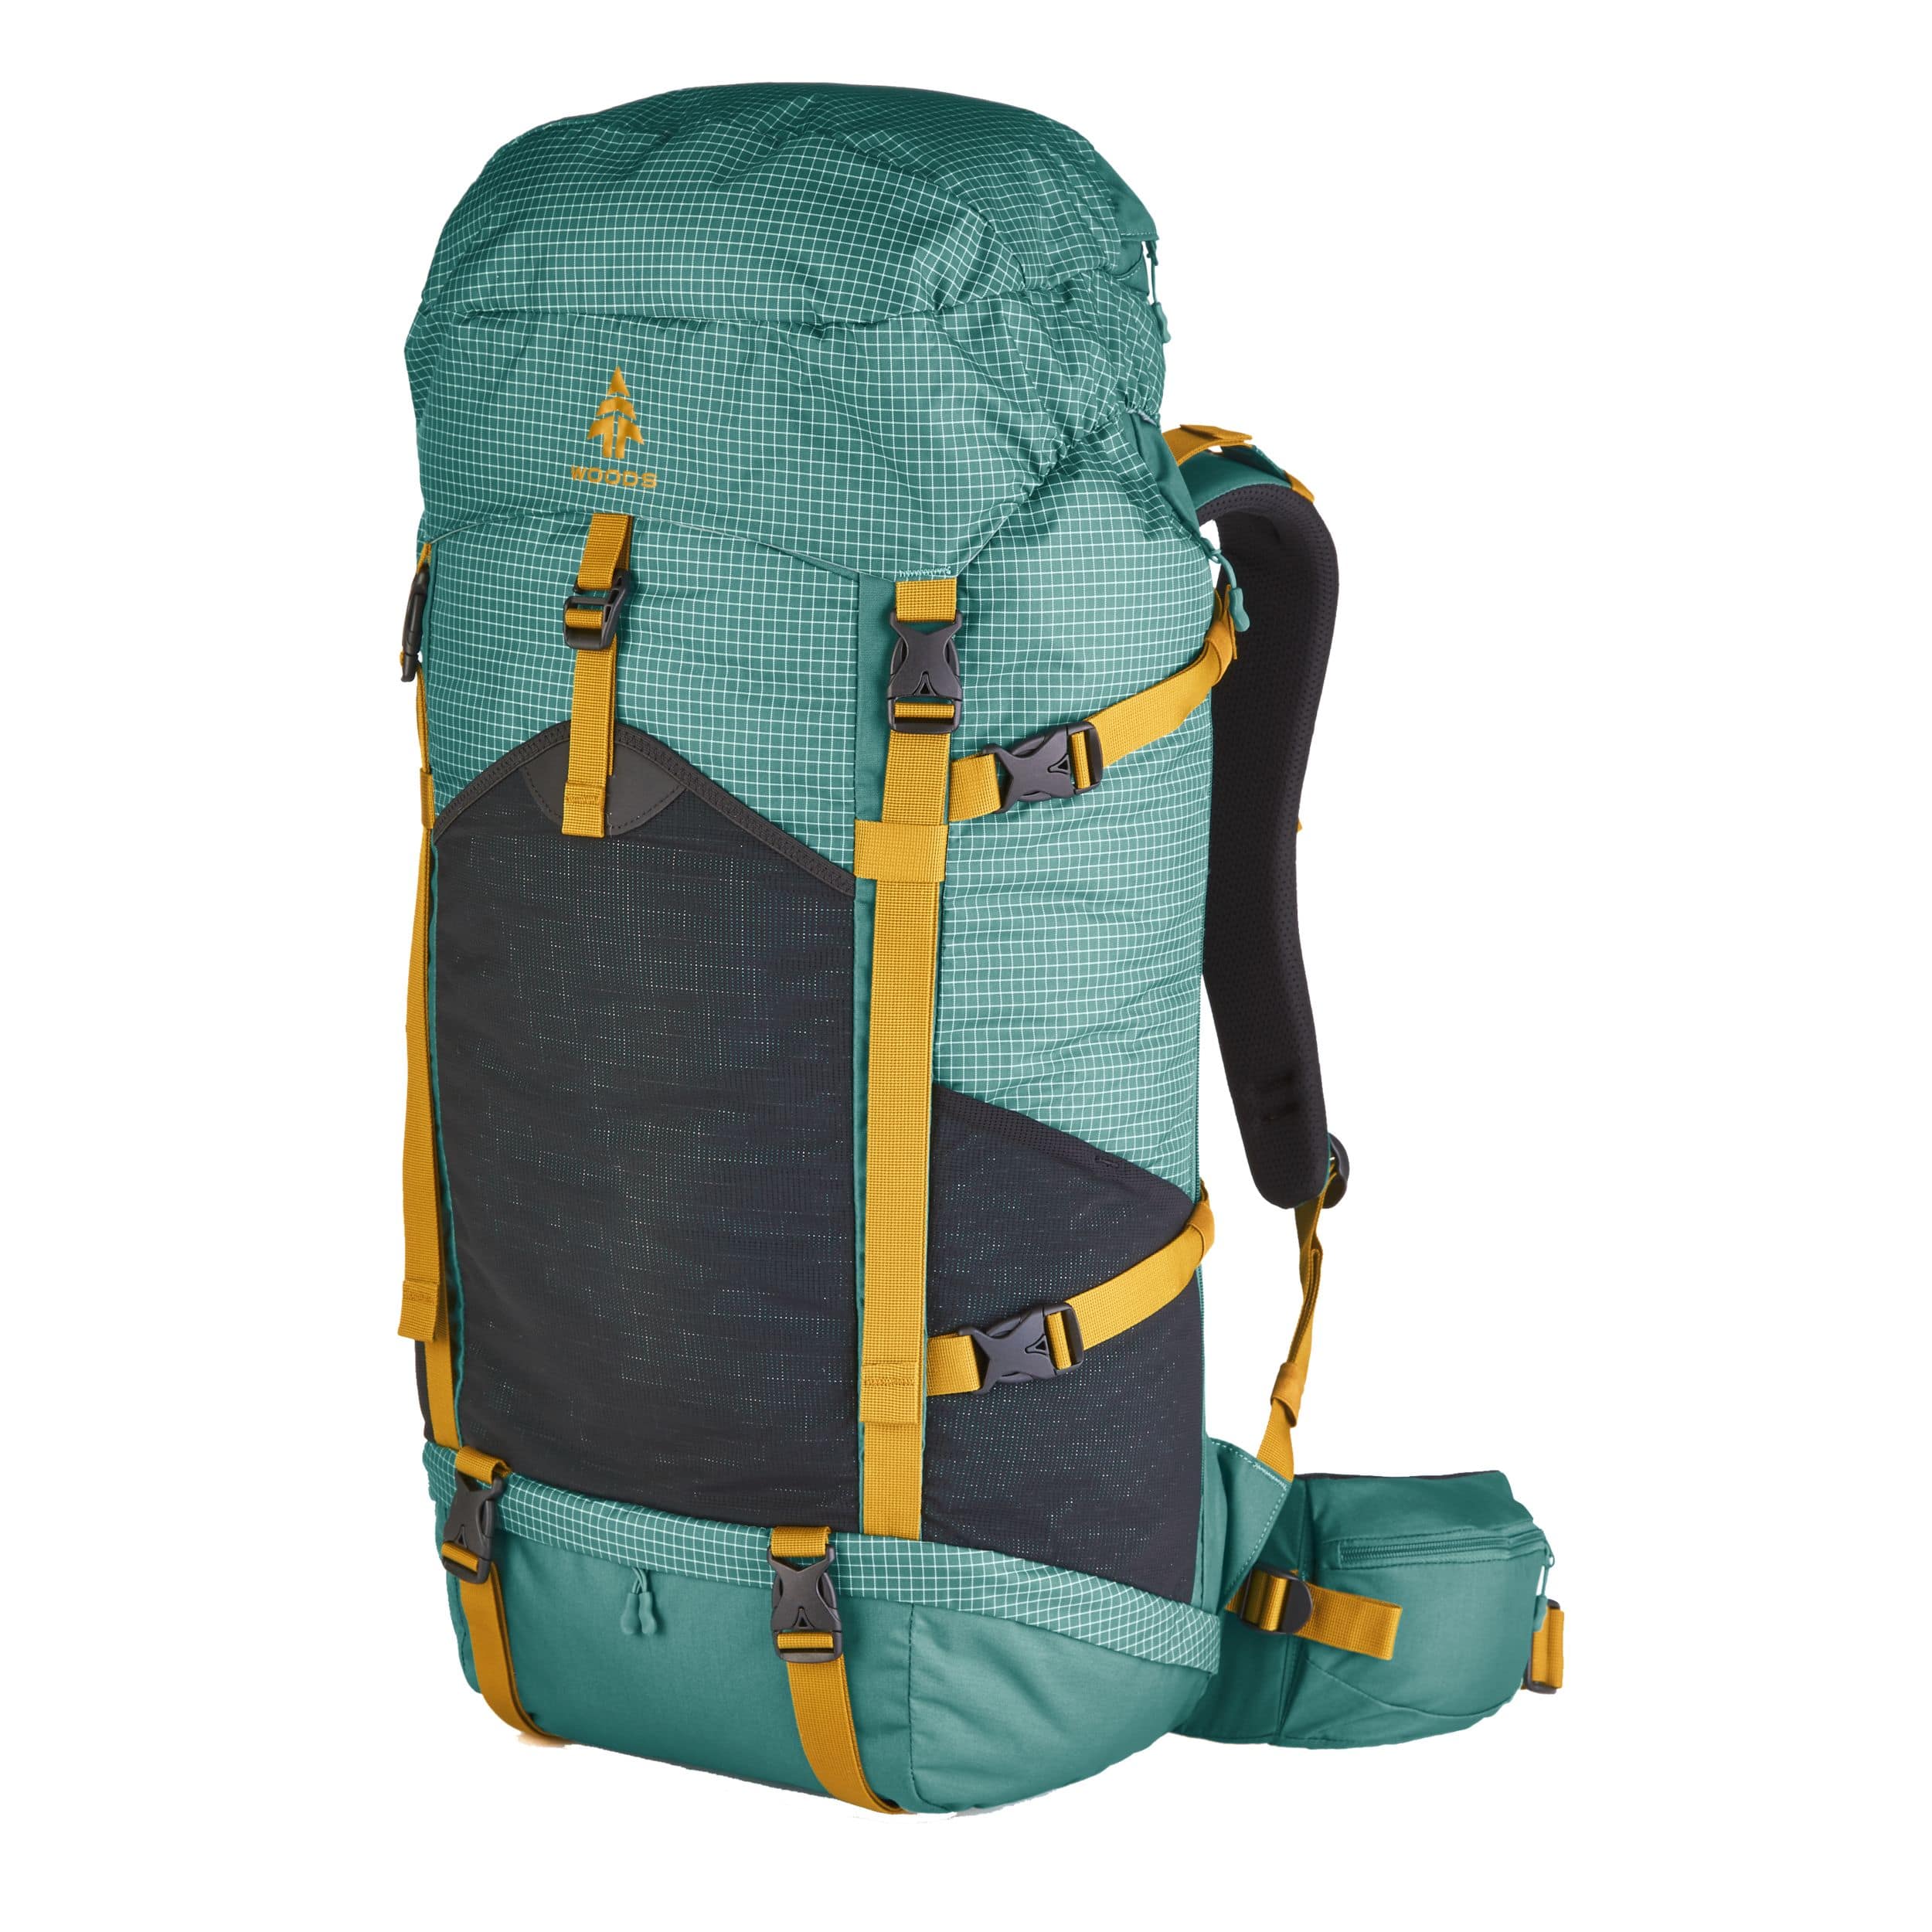 Rope and Equipment Bag - Bag et BackPack - Rescue Equipment